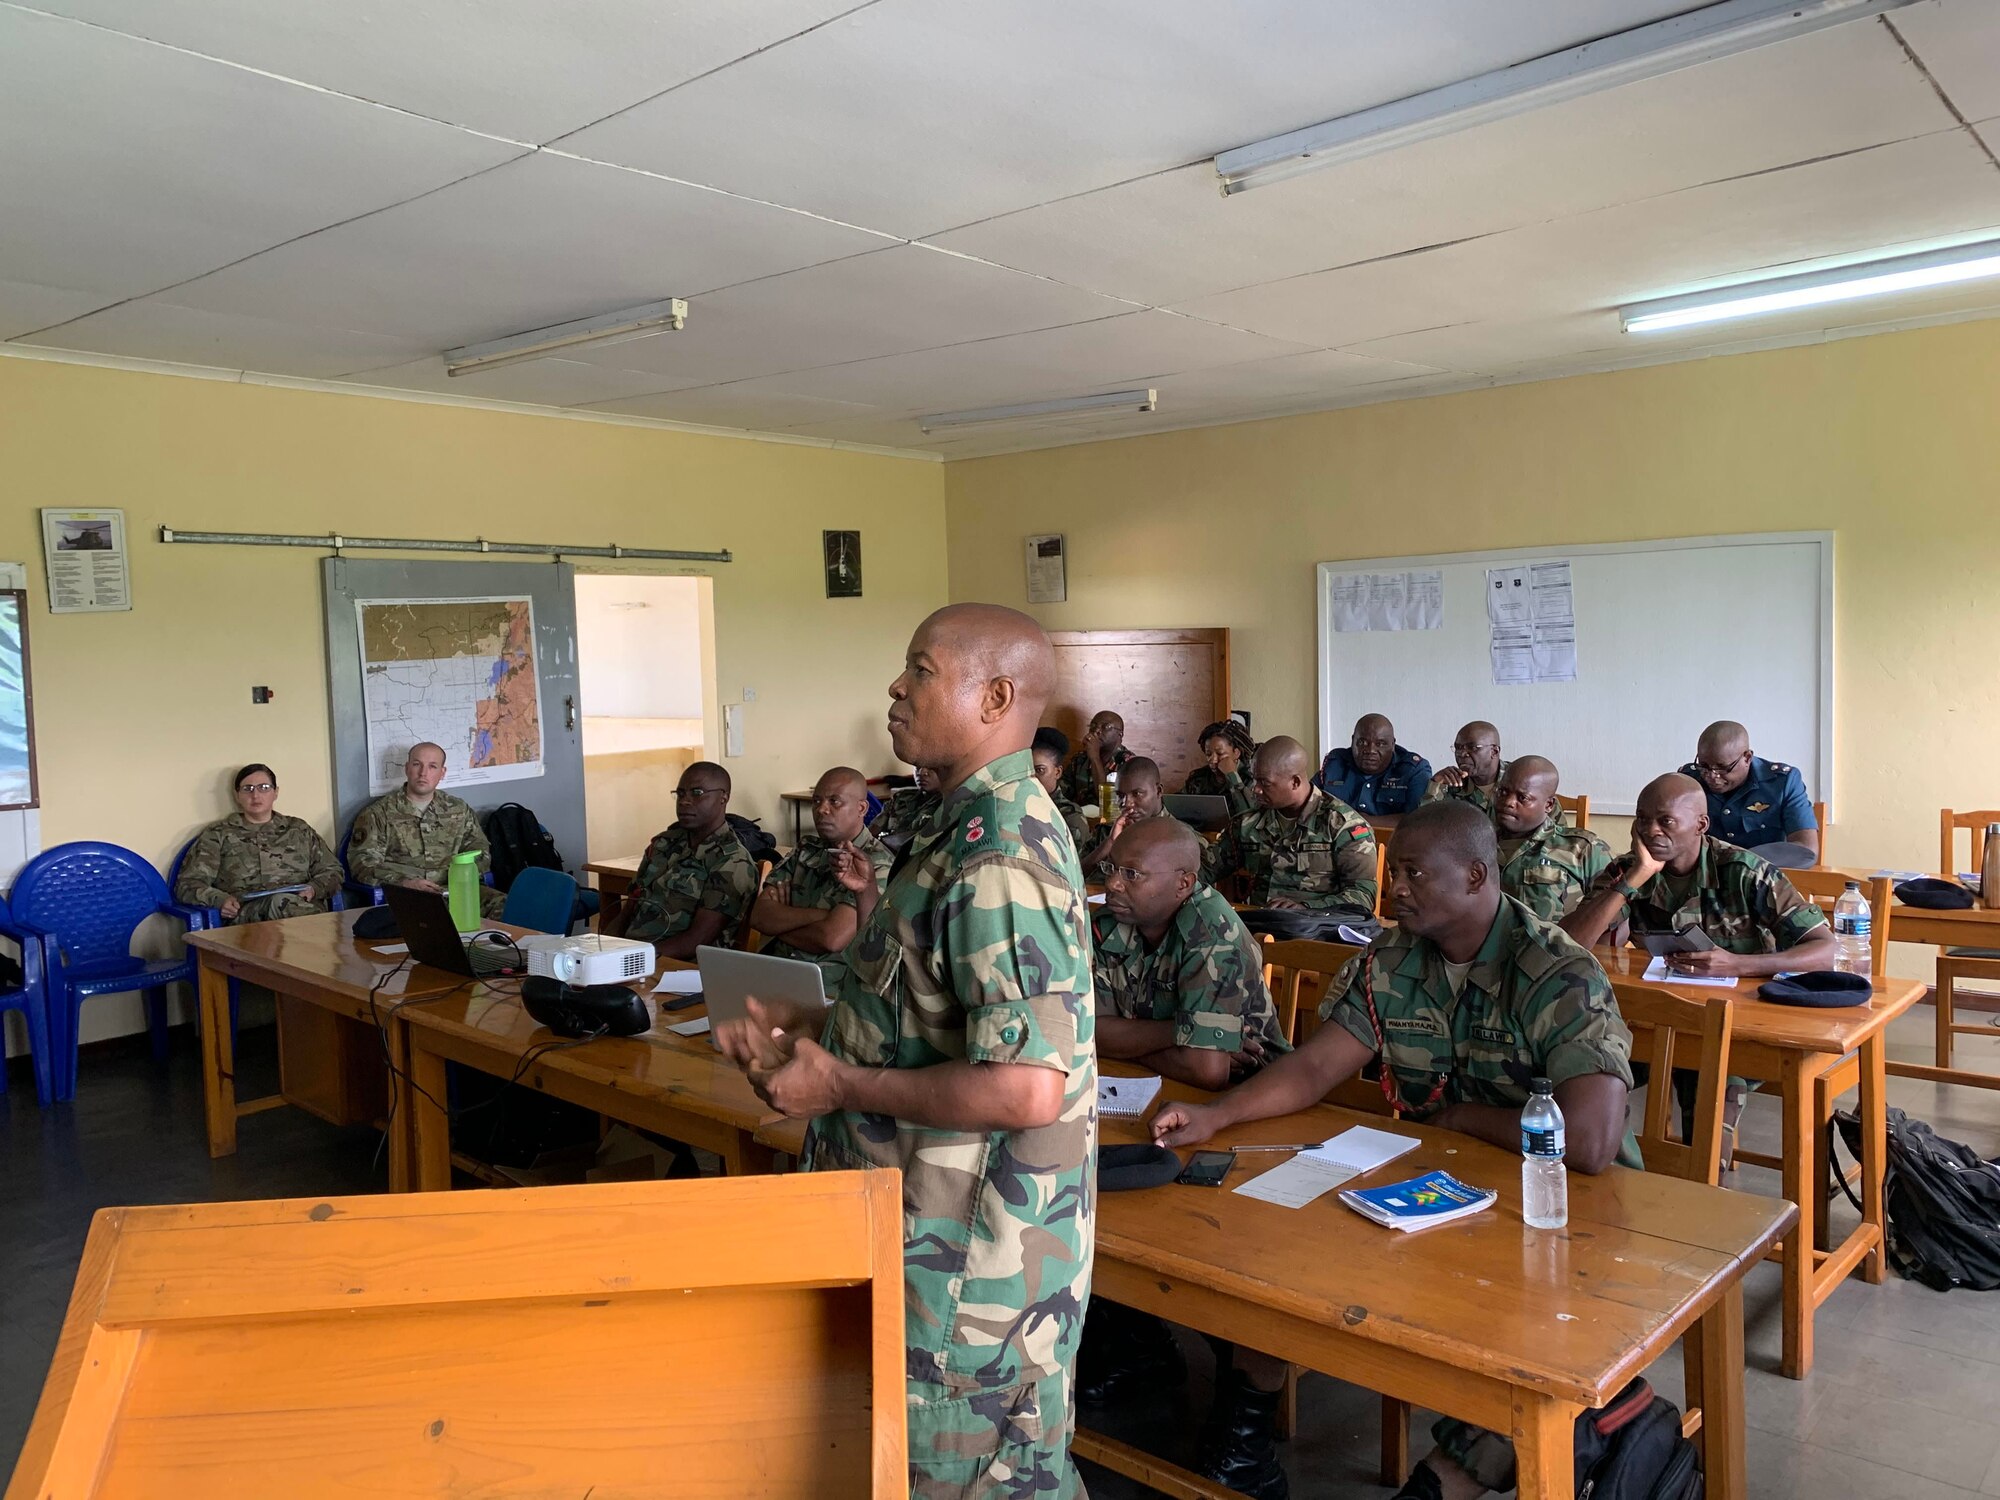 An Airmen from the Malawian air force briefs members of the U.S. Air Forces in Europe and Air Forces Africa Manpower, Personnel and Services Directorate, Force Development team at Lilongwe Air Base, Malawi, Jan. 14, 2020. The USAFE-AFAFRICA force development team has been working with the Malawian air force since 2018 to build partnership capacity in the region. (U.S. Air Force photo by Capt. Korey Fratini)